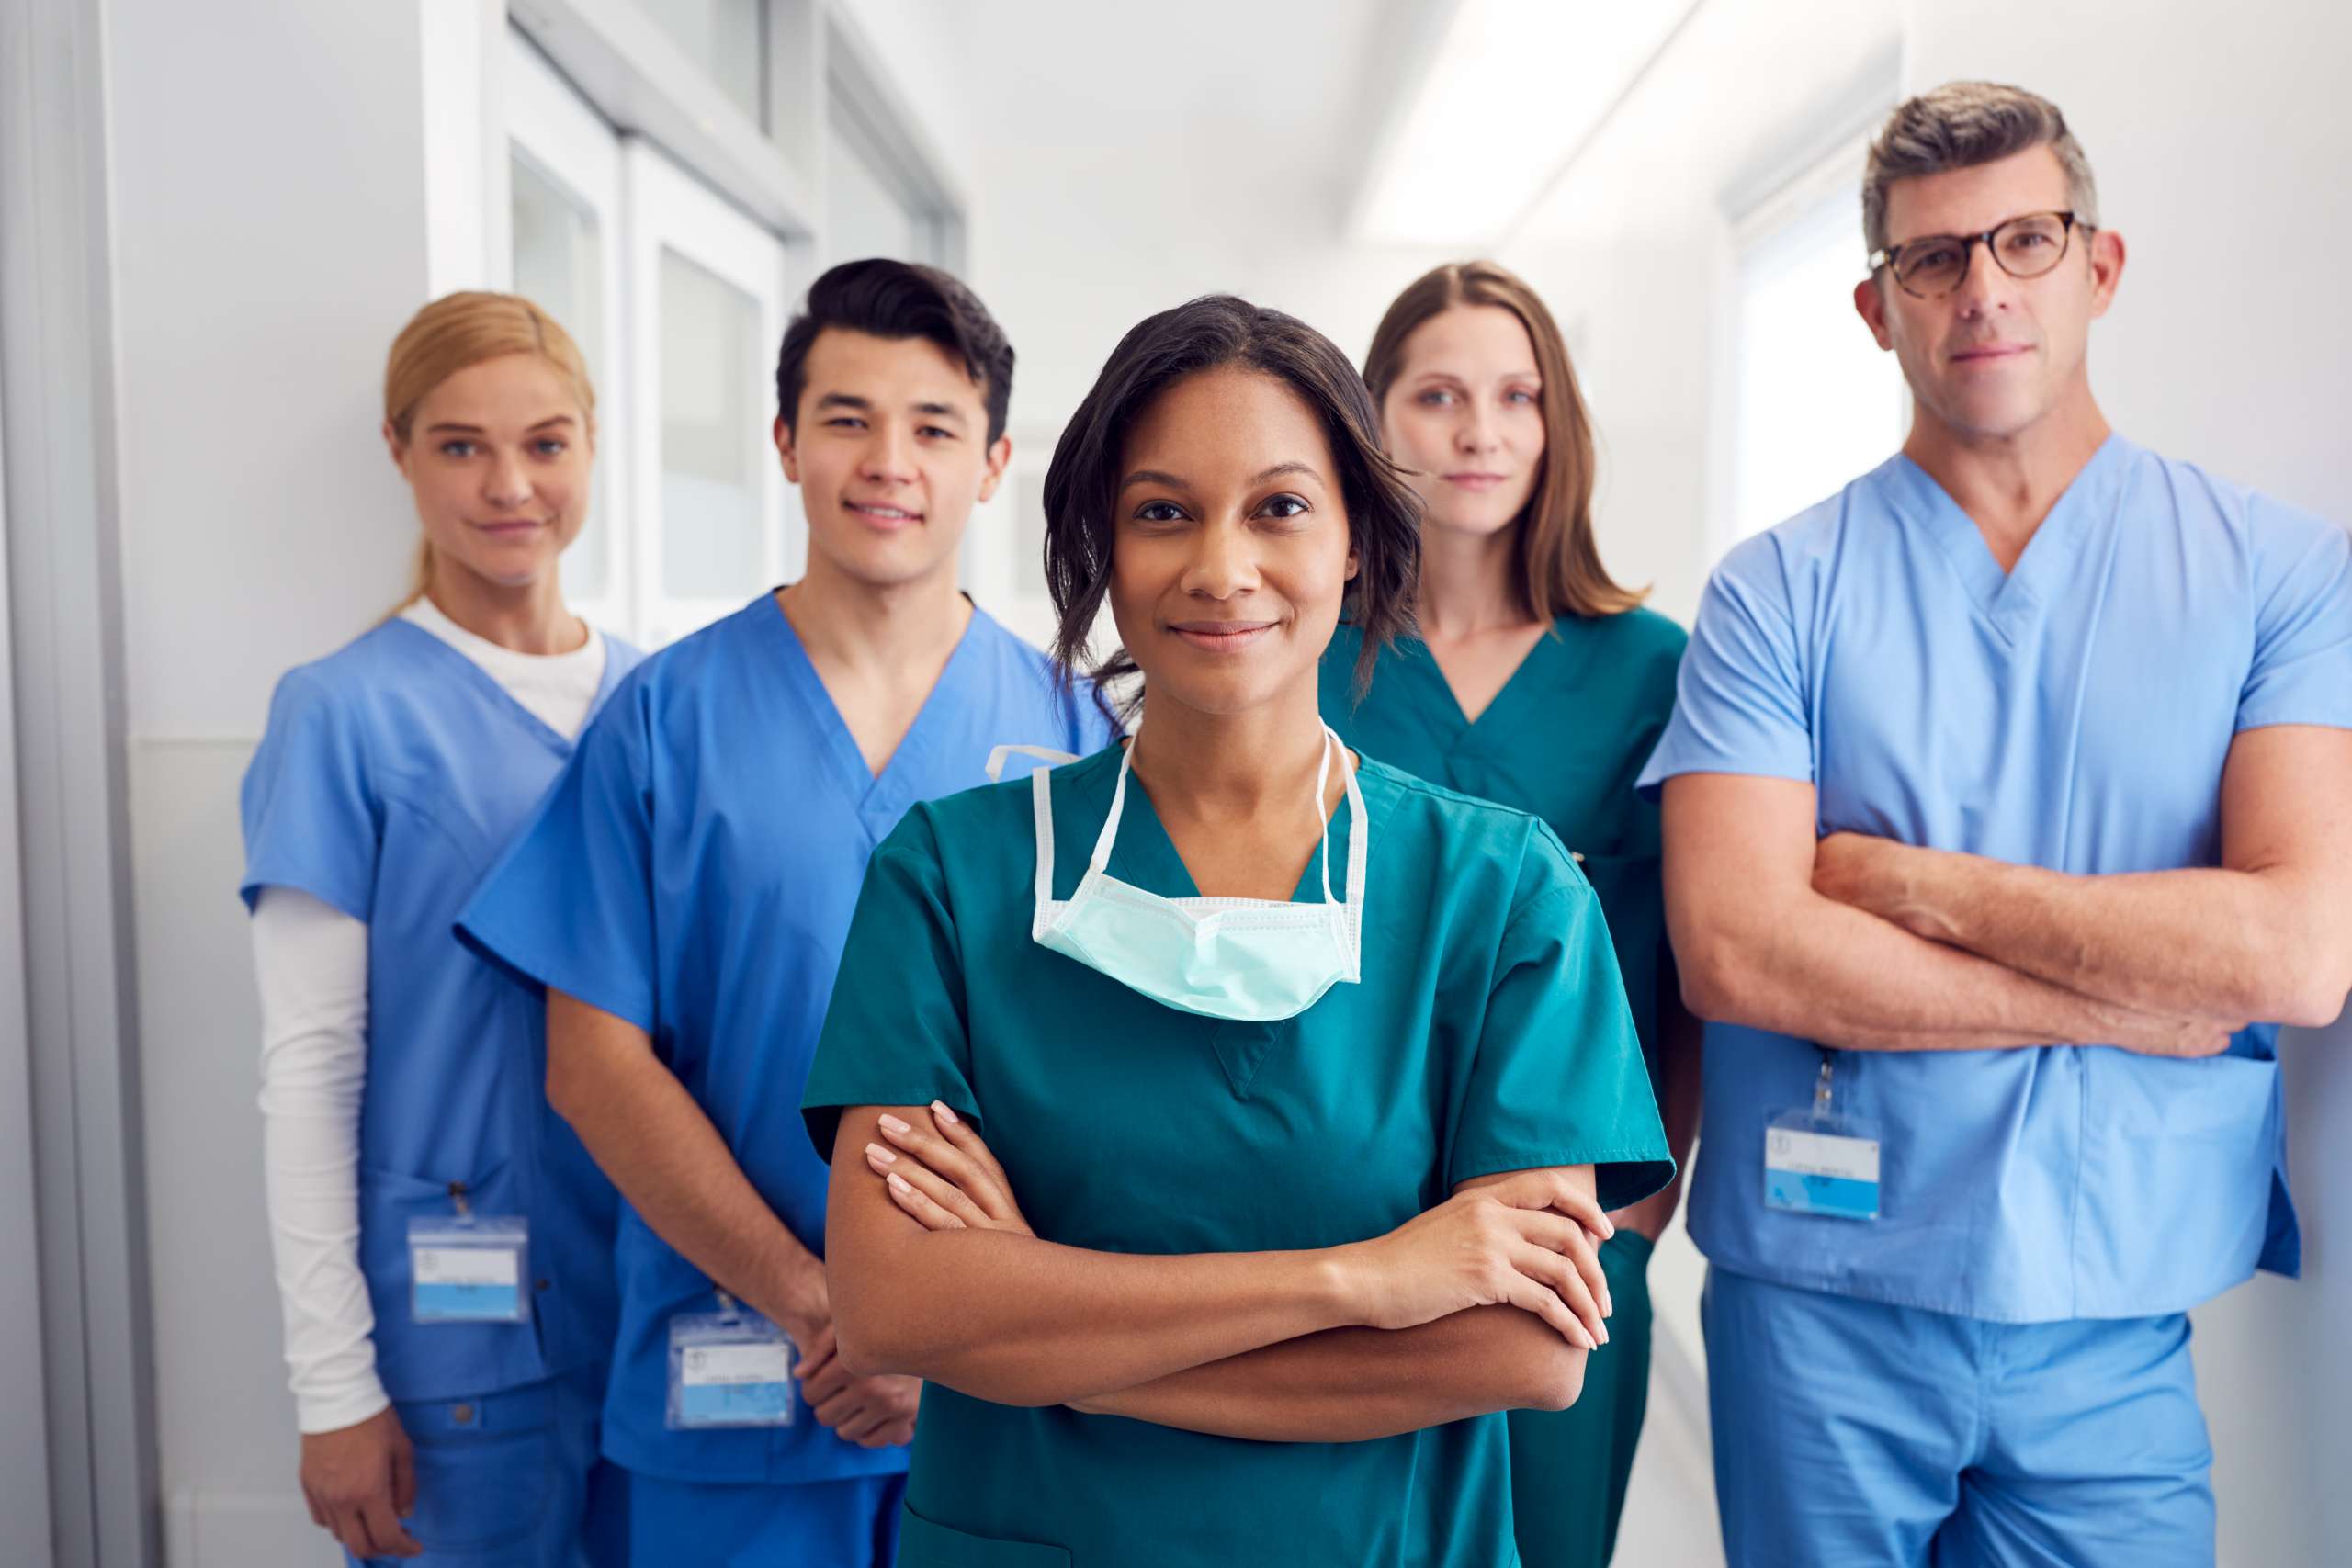 A group of medical professionals standing